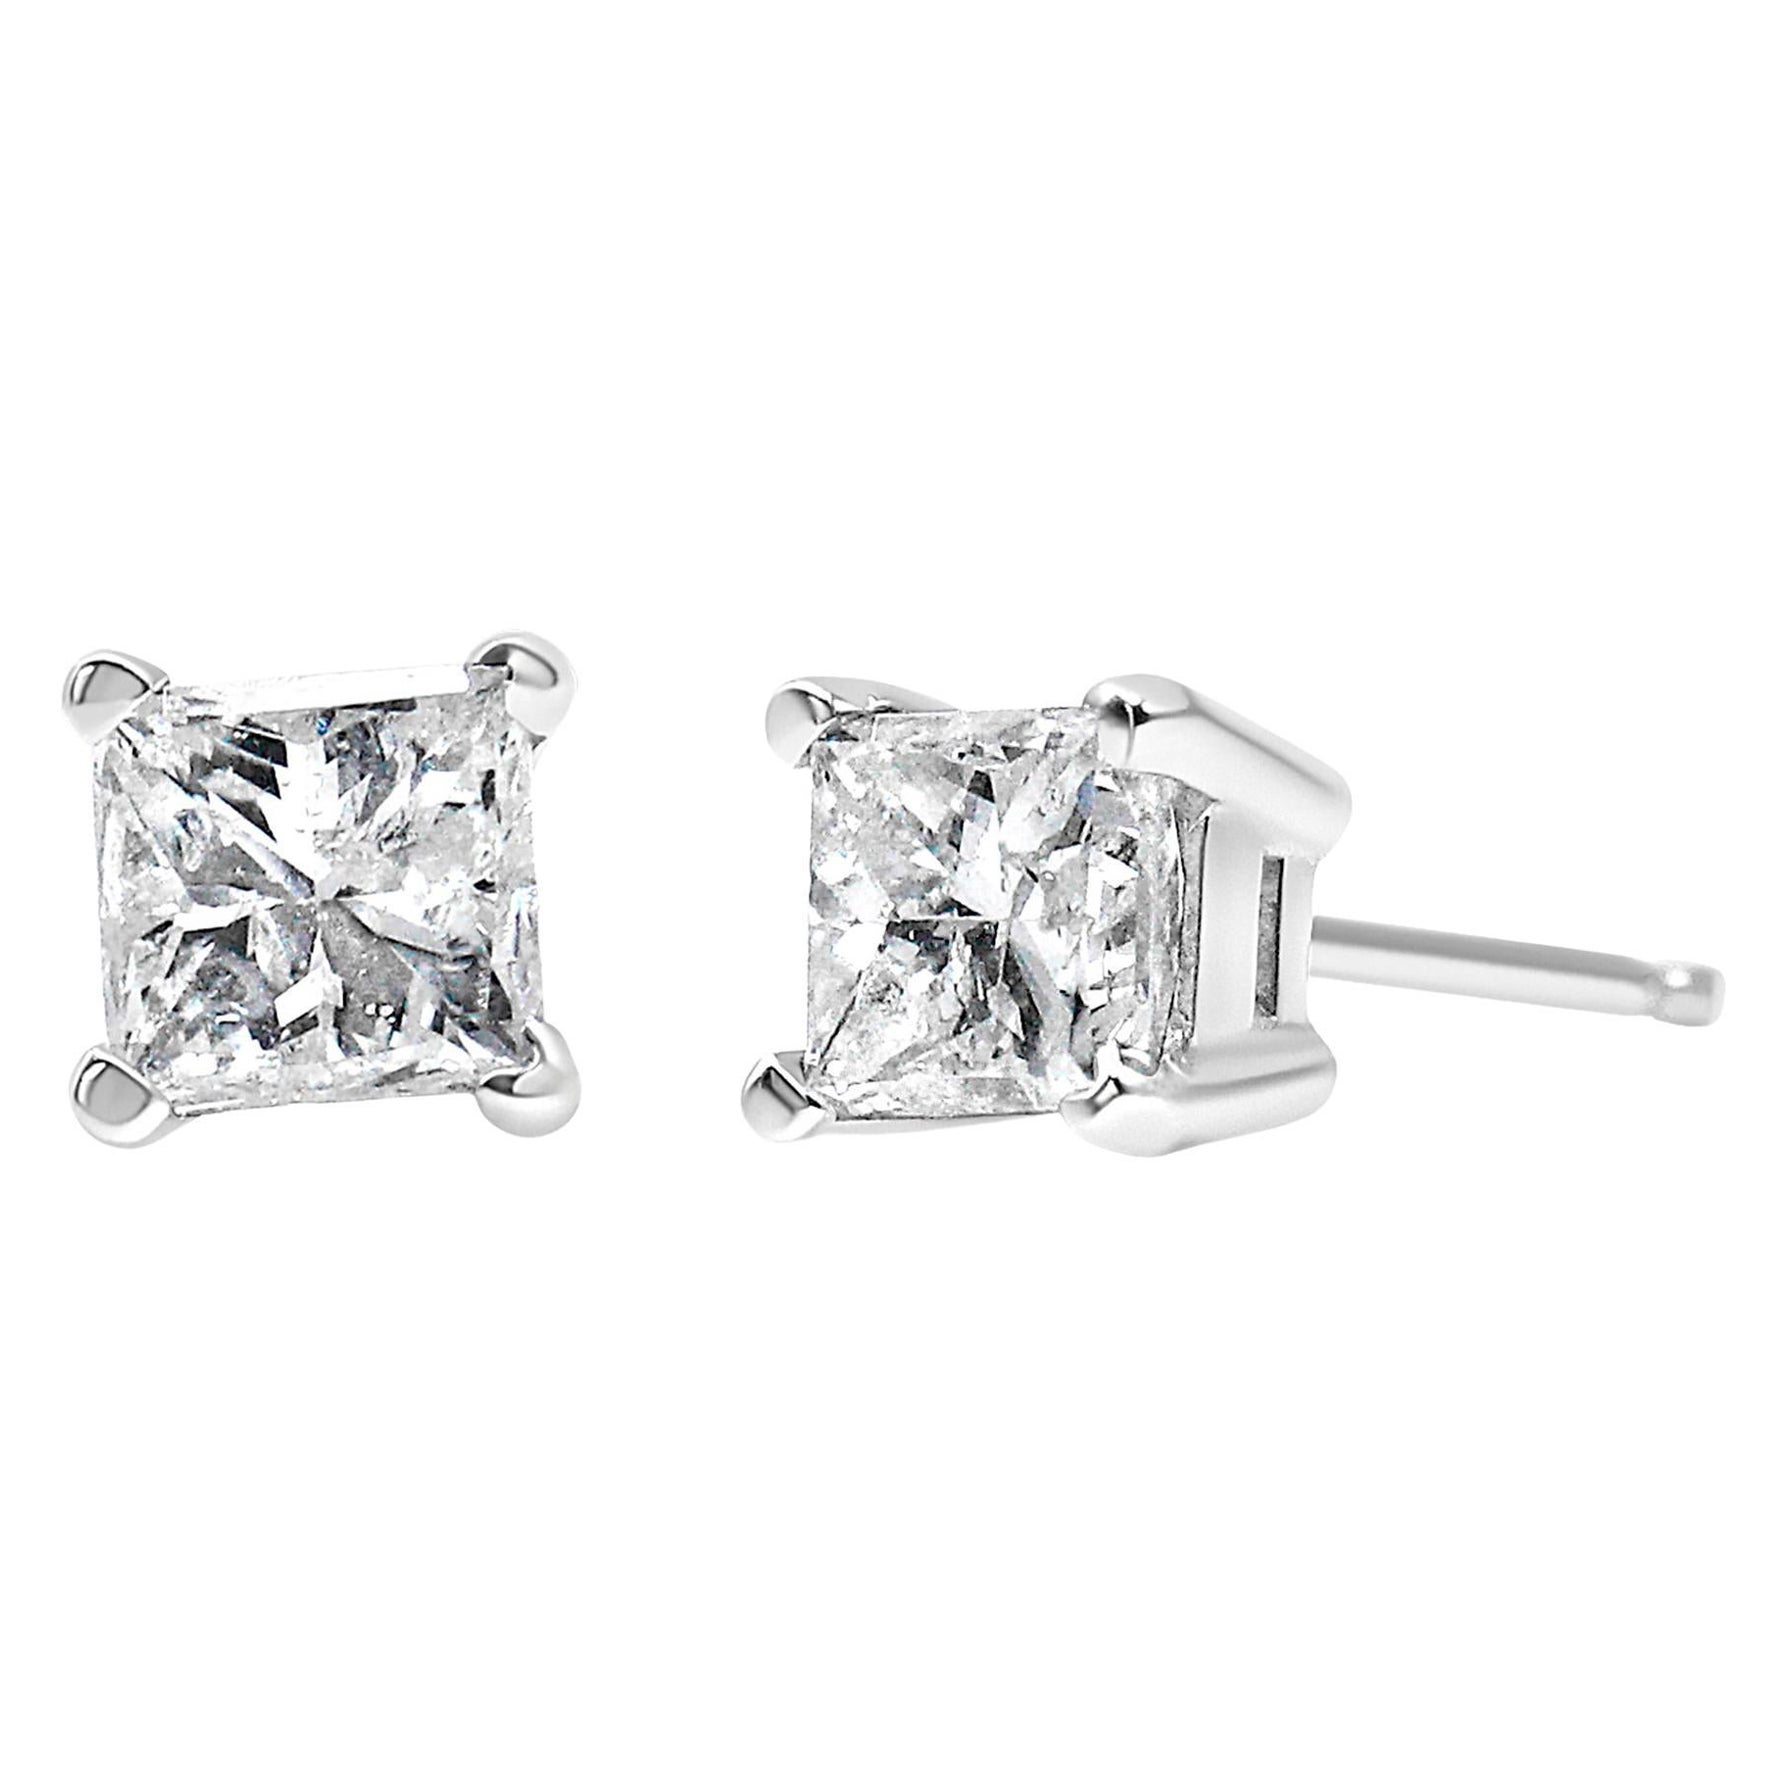 AGS Certified 14K White Gold 1.0 Ct Princess-Cut Solitaire Diamond Stud Earrings For Sale